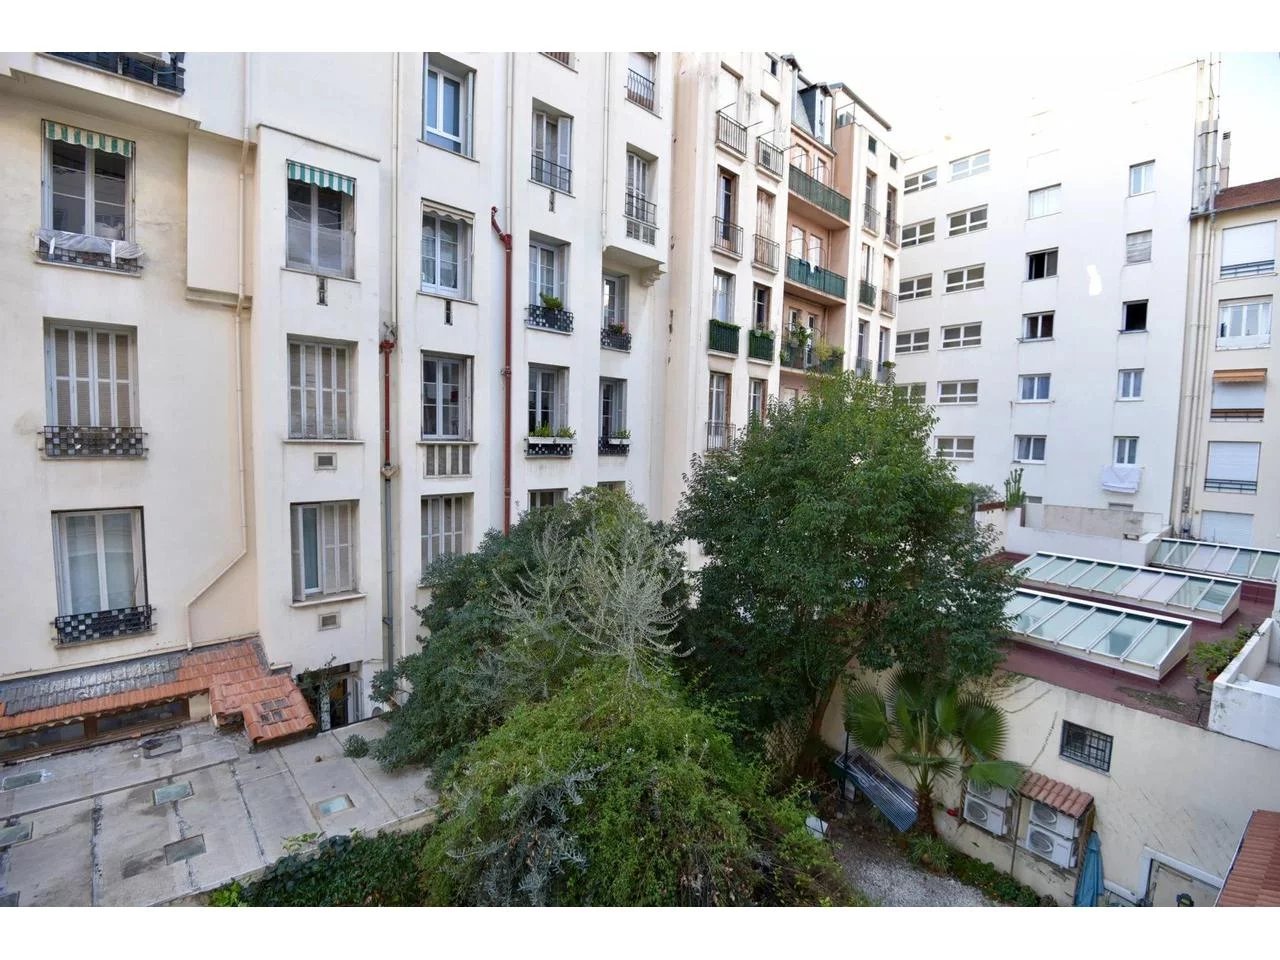 Appartement  2 Rooms 54.35m2  for sale   294 000 €